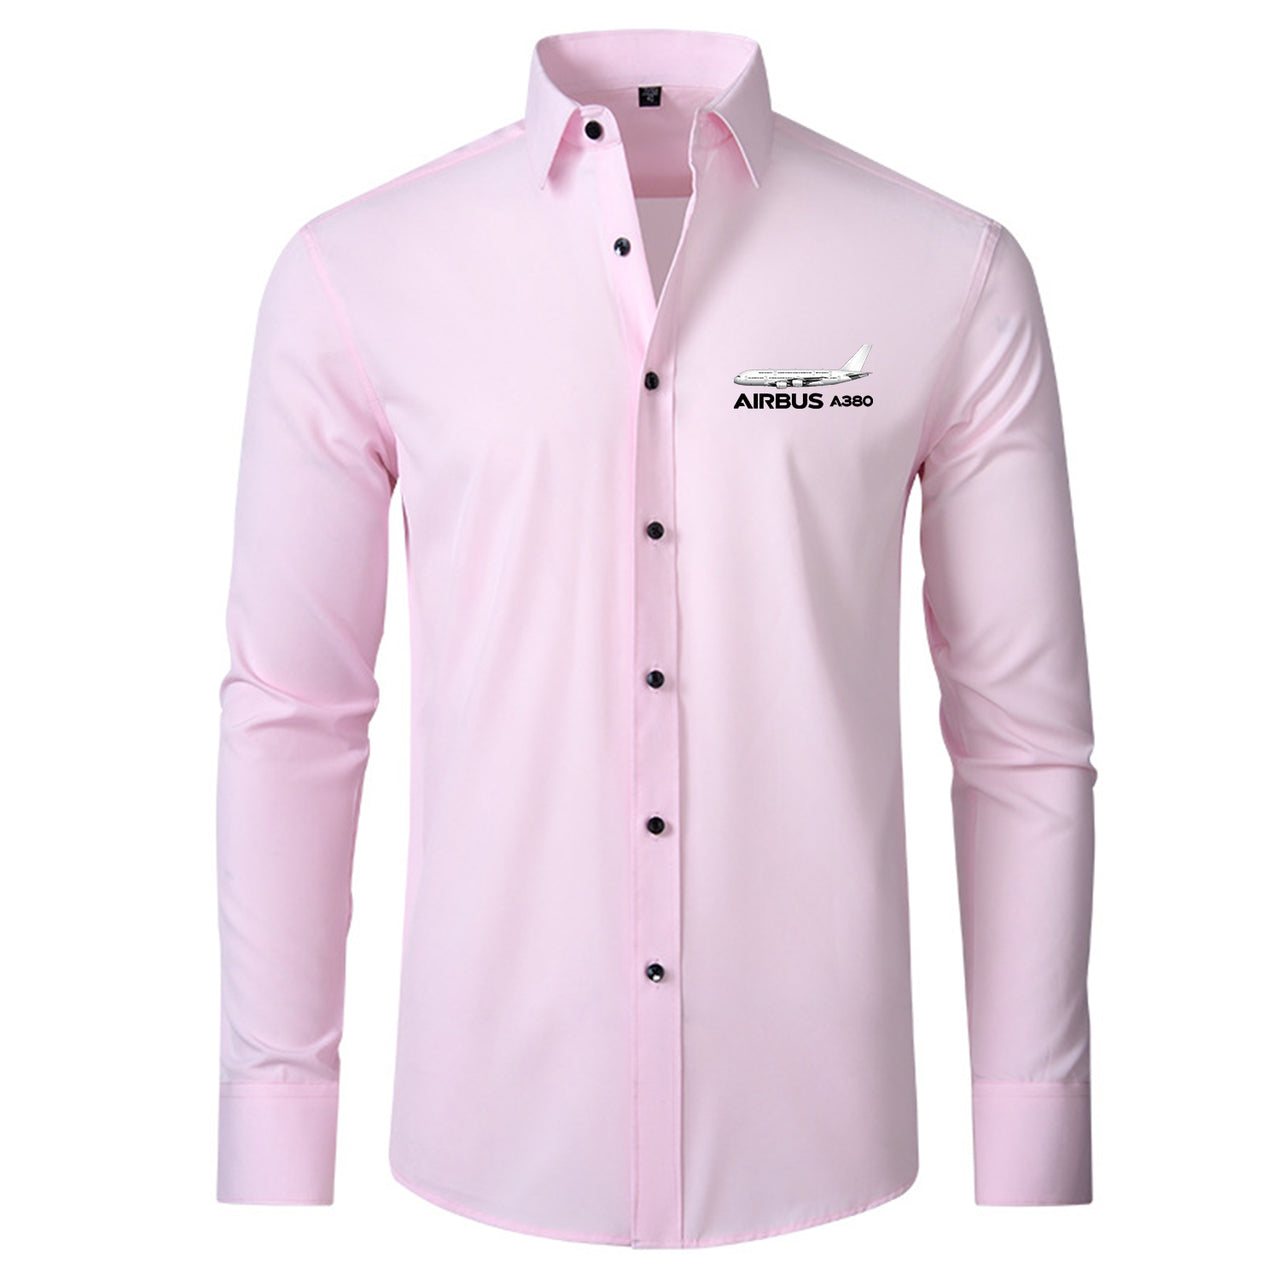 The Airbus A380 Designed Long Sleeve Shirts